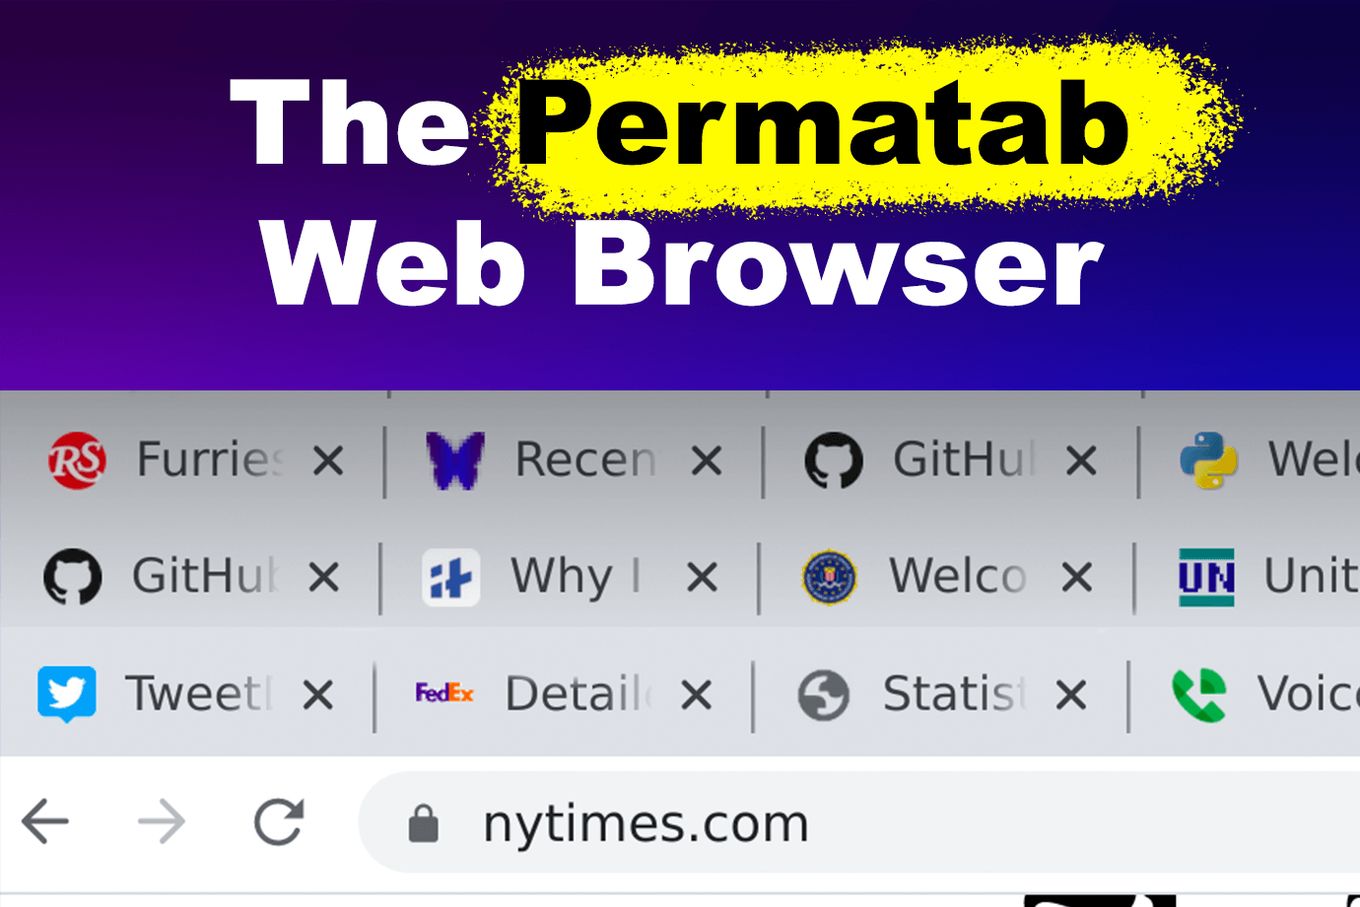 What is the Permatab Web Browser?